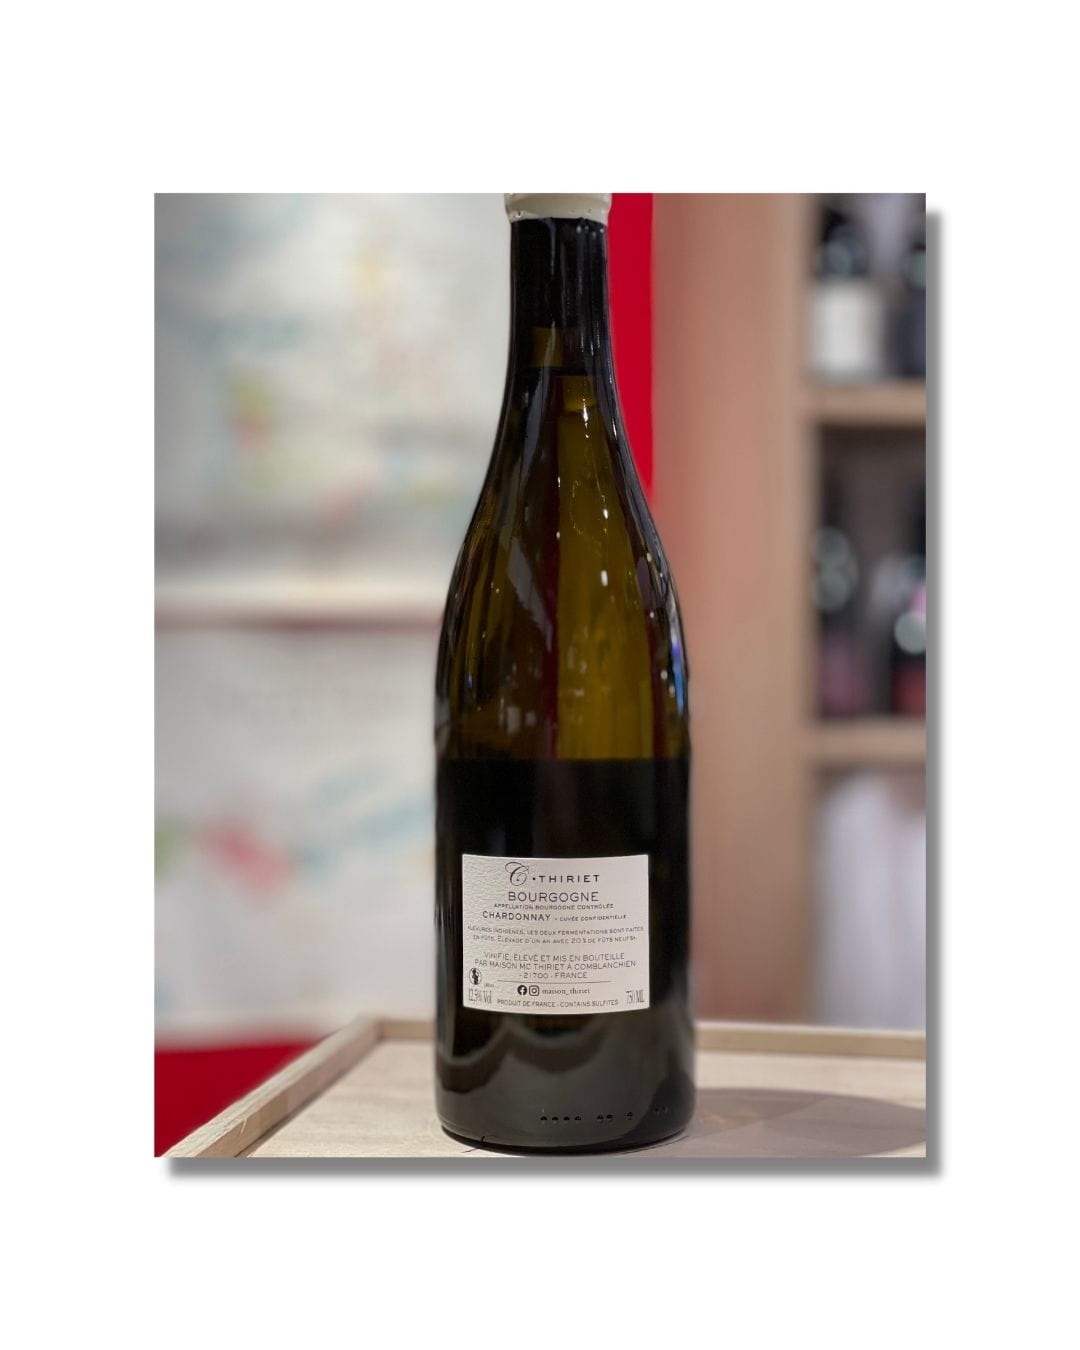 Shop Maison Thiriet Maison Thiriet Bourgogne Chardonnay Cuvee Confidentielle 2020 online at PENTICTON artisanal French wine store in Hong Kong. Discover other French wines, promotions, workshops and featured offers at pentictonpacific.com 